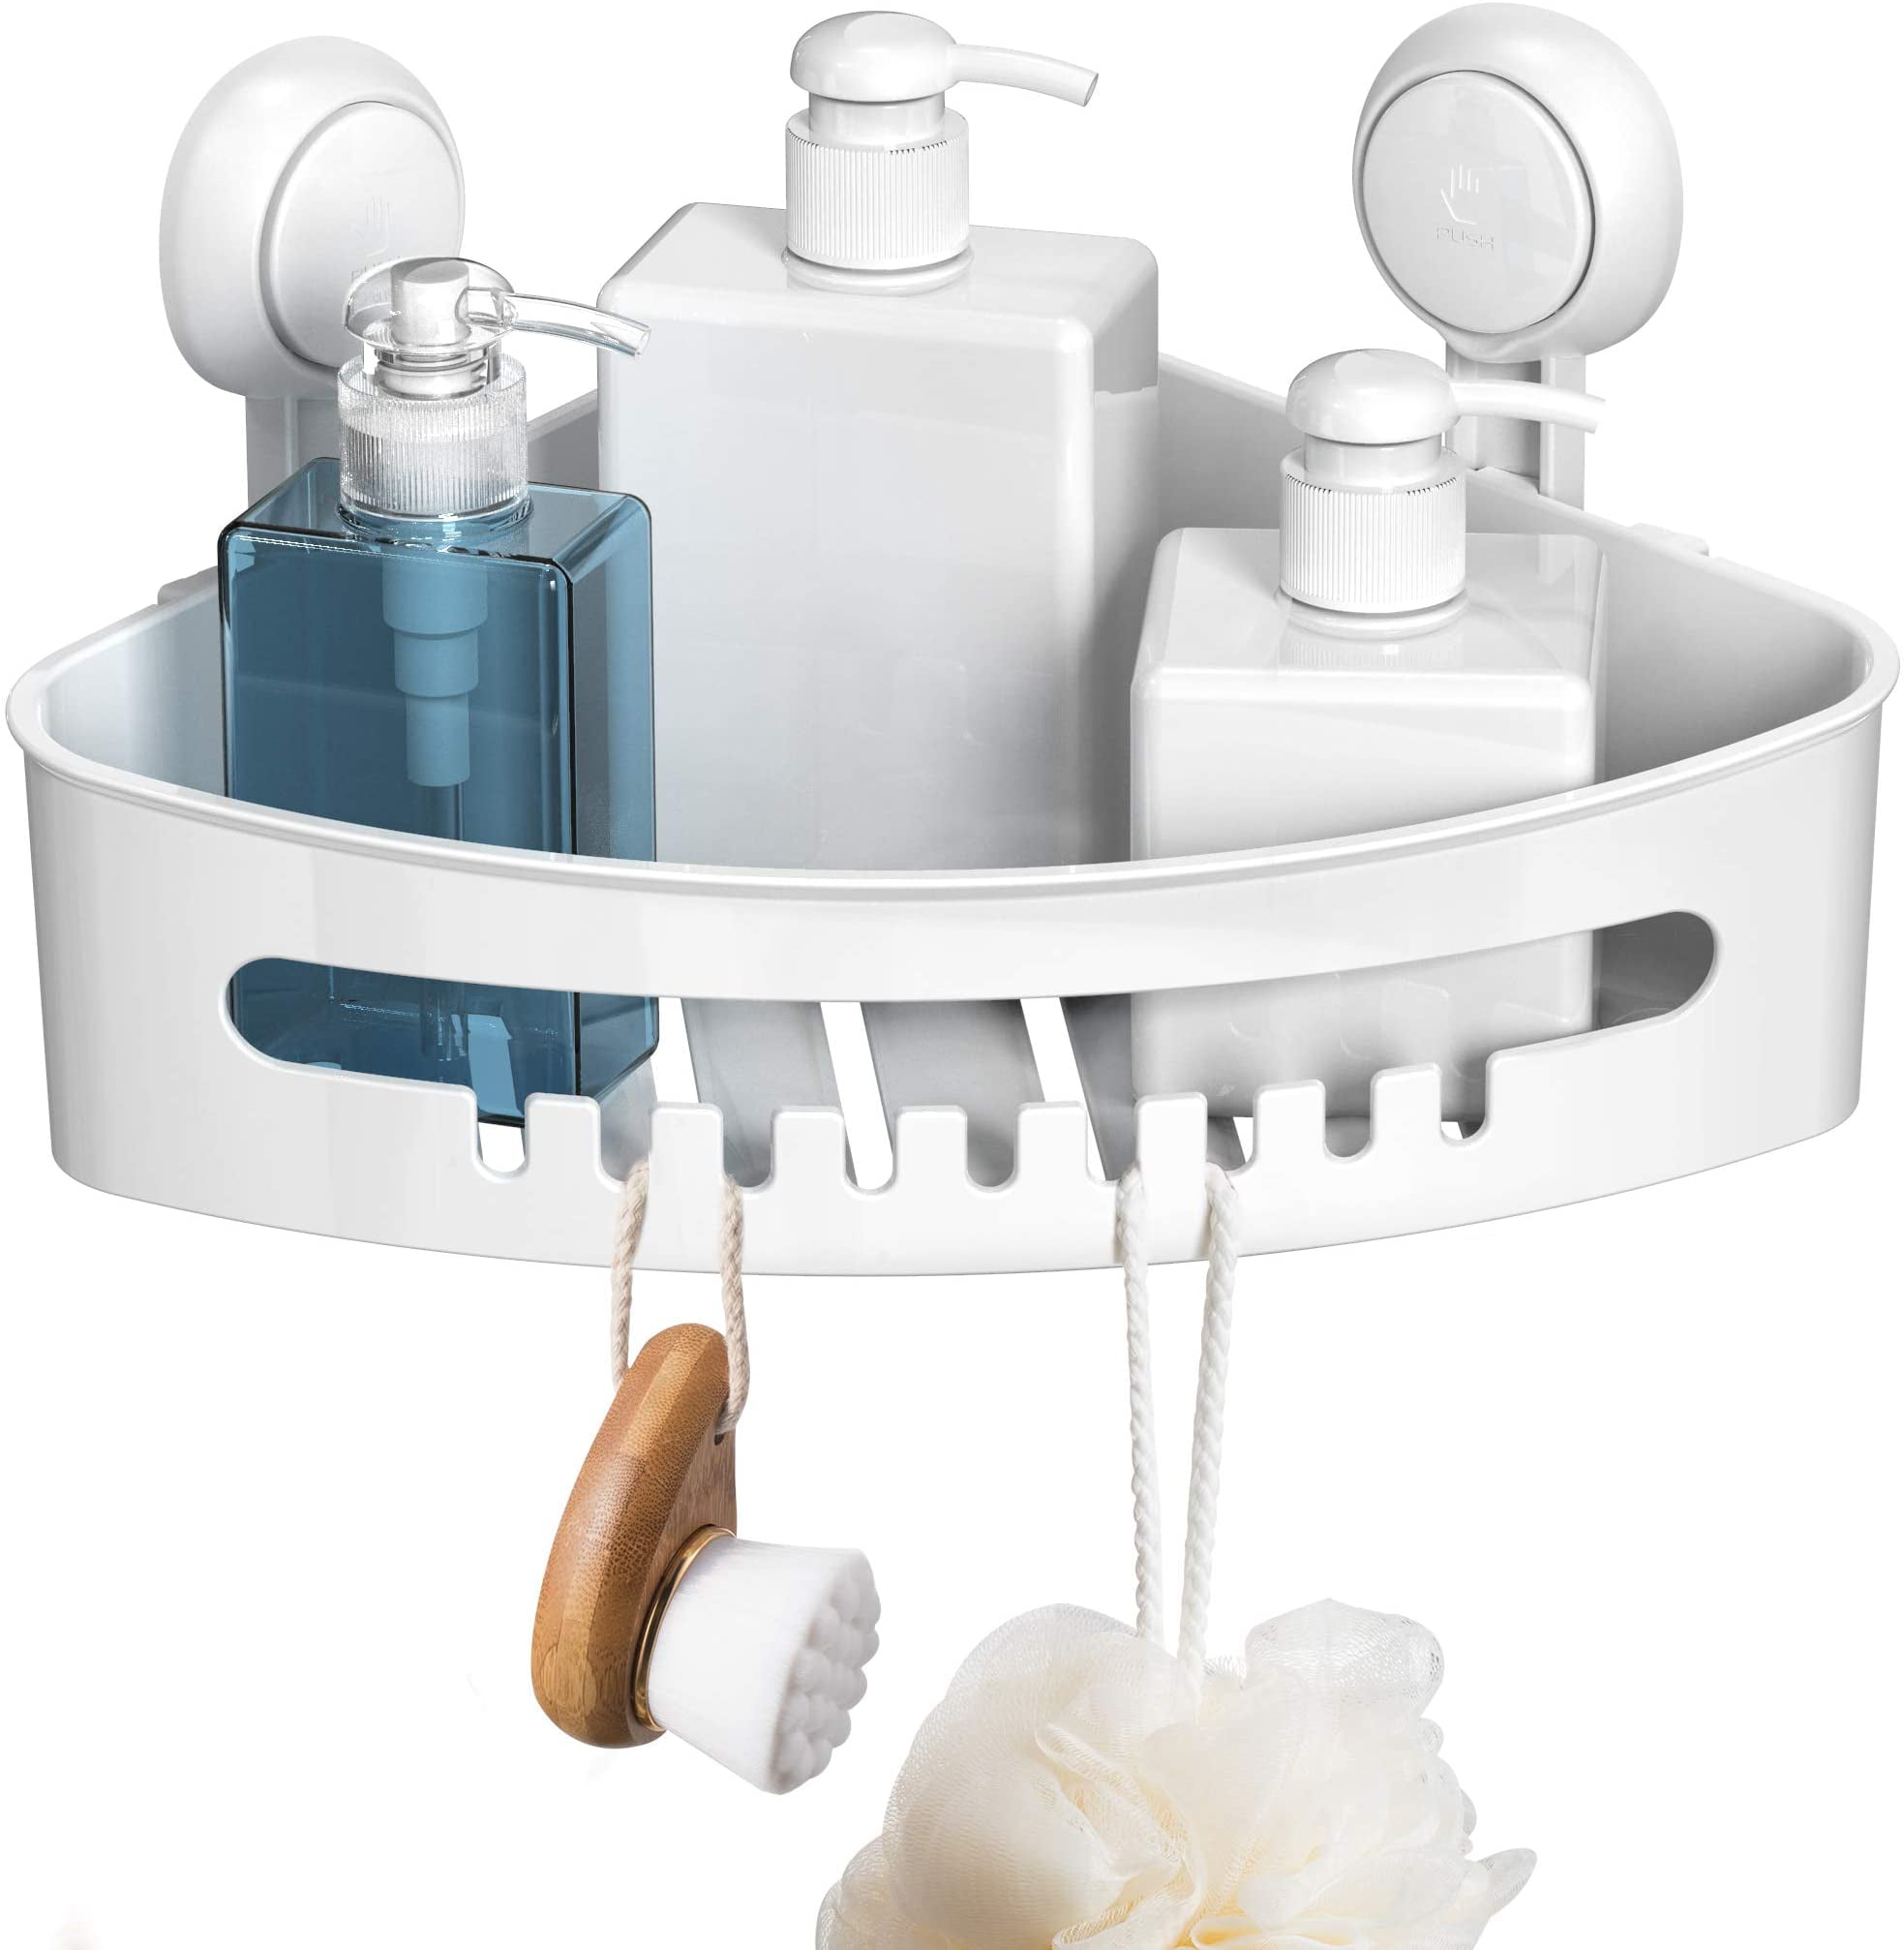 Suction Cup Shower Caddy Plastic Clear Storage Shelf toothpaste shampoo